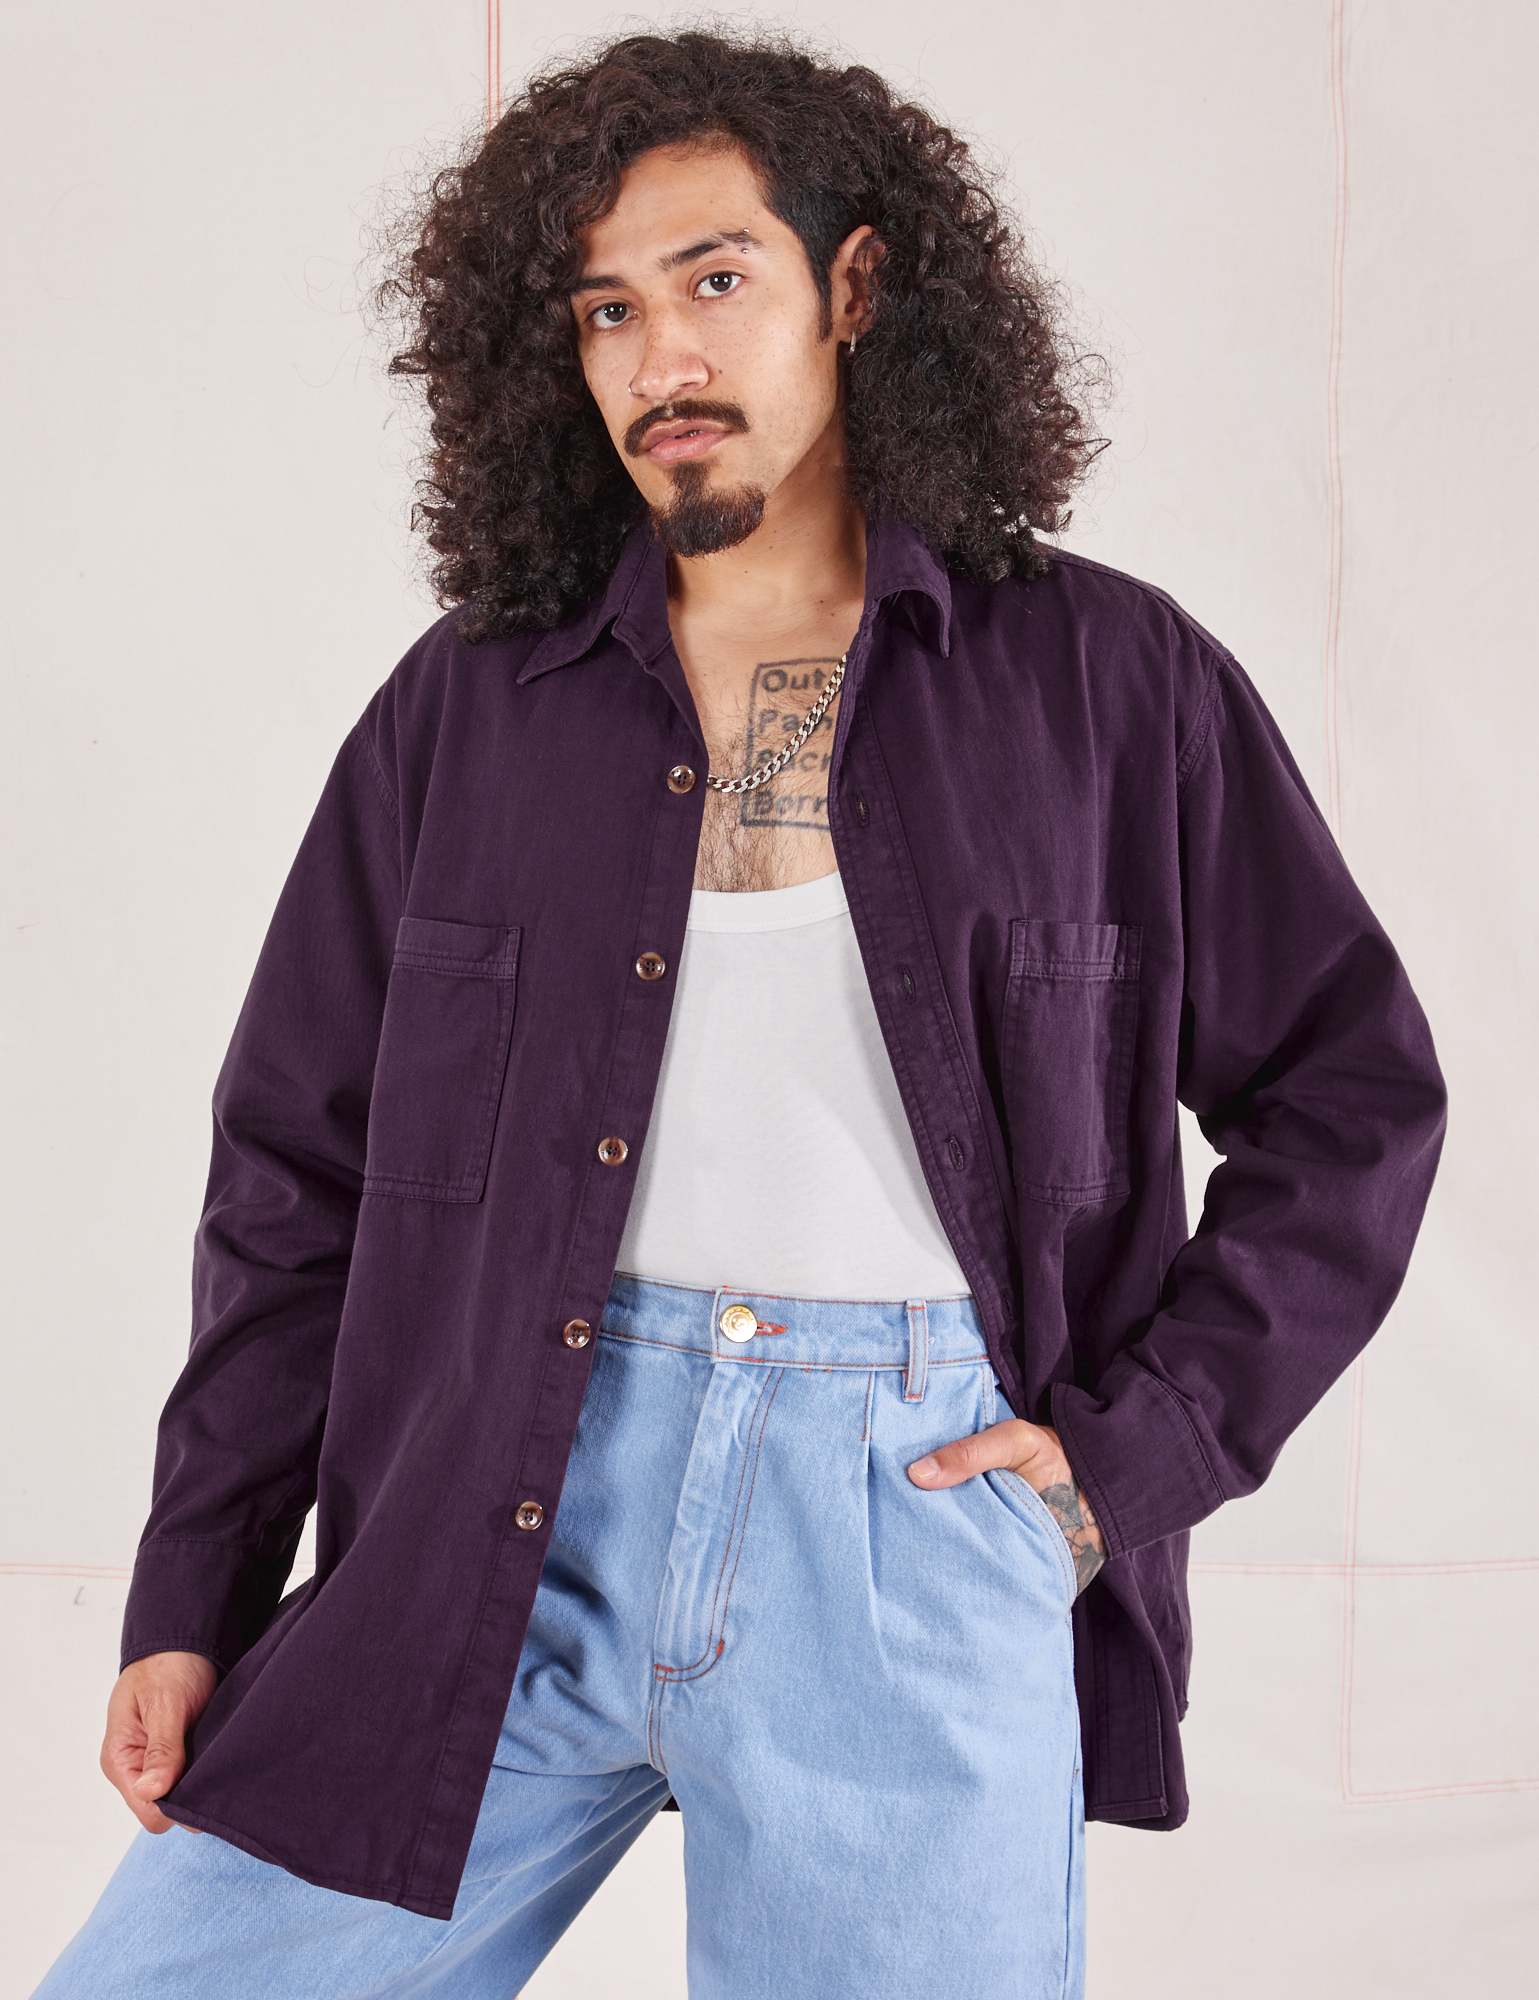 Jesse is 5&#39;8&quot; and wearing S Oversize Overshirt in Nebula Purple